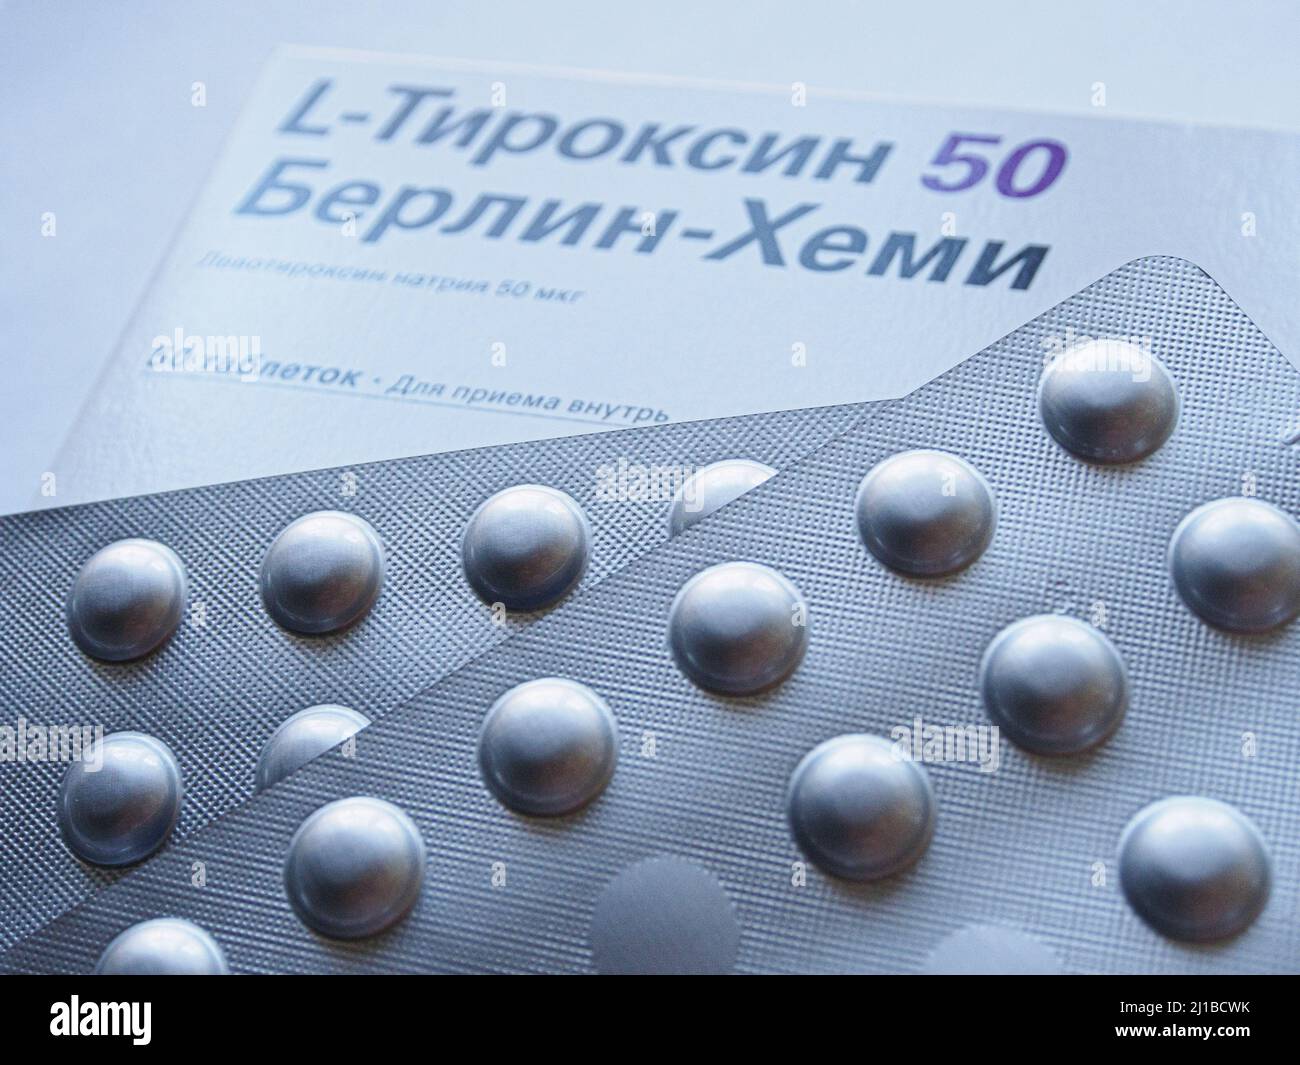 Moscow, Russia. 24th Mar, 2022. Blister packs with L-thyroxine tablets seen  displayed on a table. Visitors to pharmacies in Russia have encountered  difficulties in purchasing drugs Eutirox and L-thyroxine (Levothyroxine -  thyroid